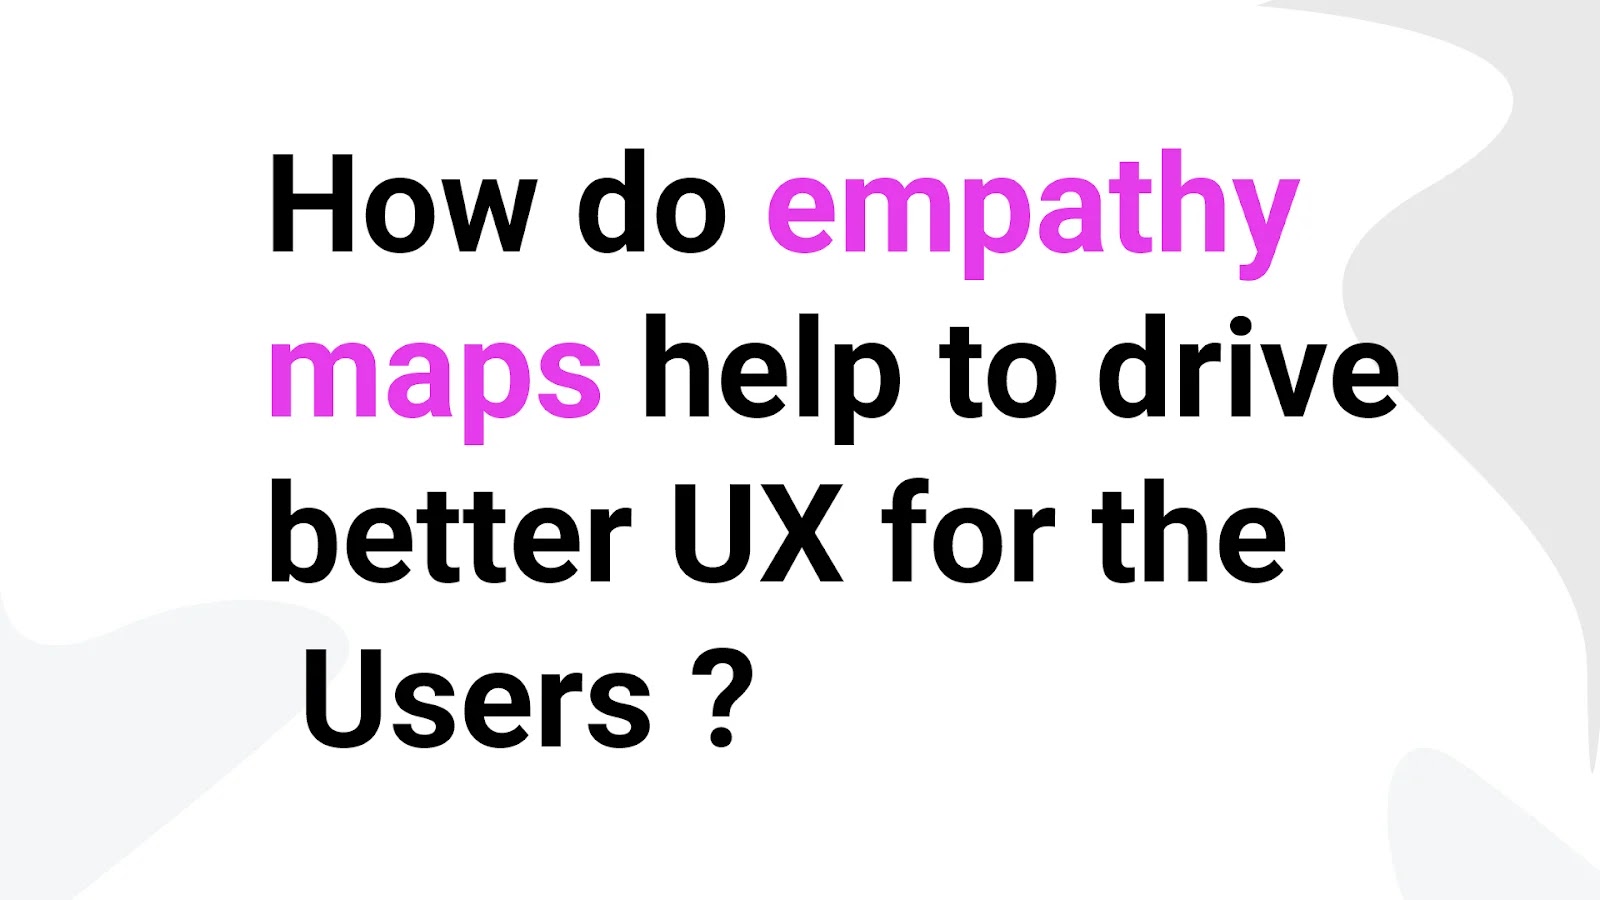 What are empathy maps?